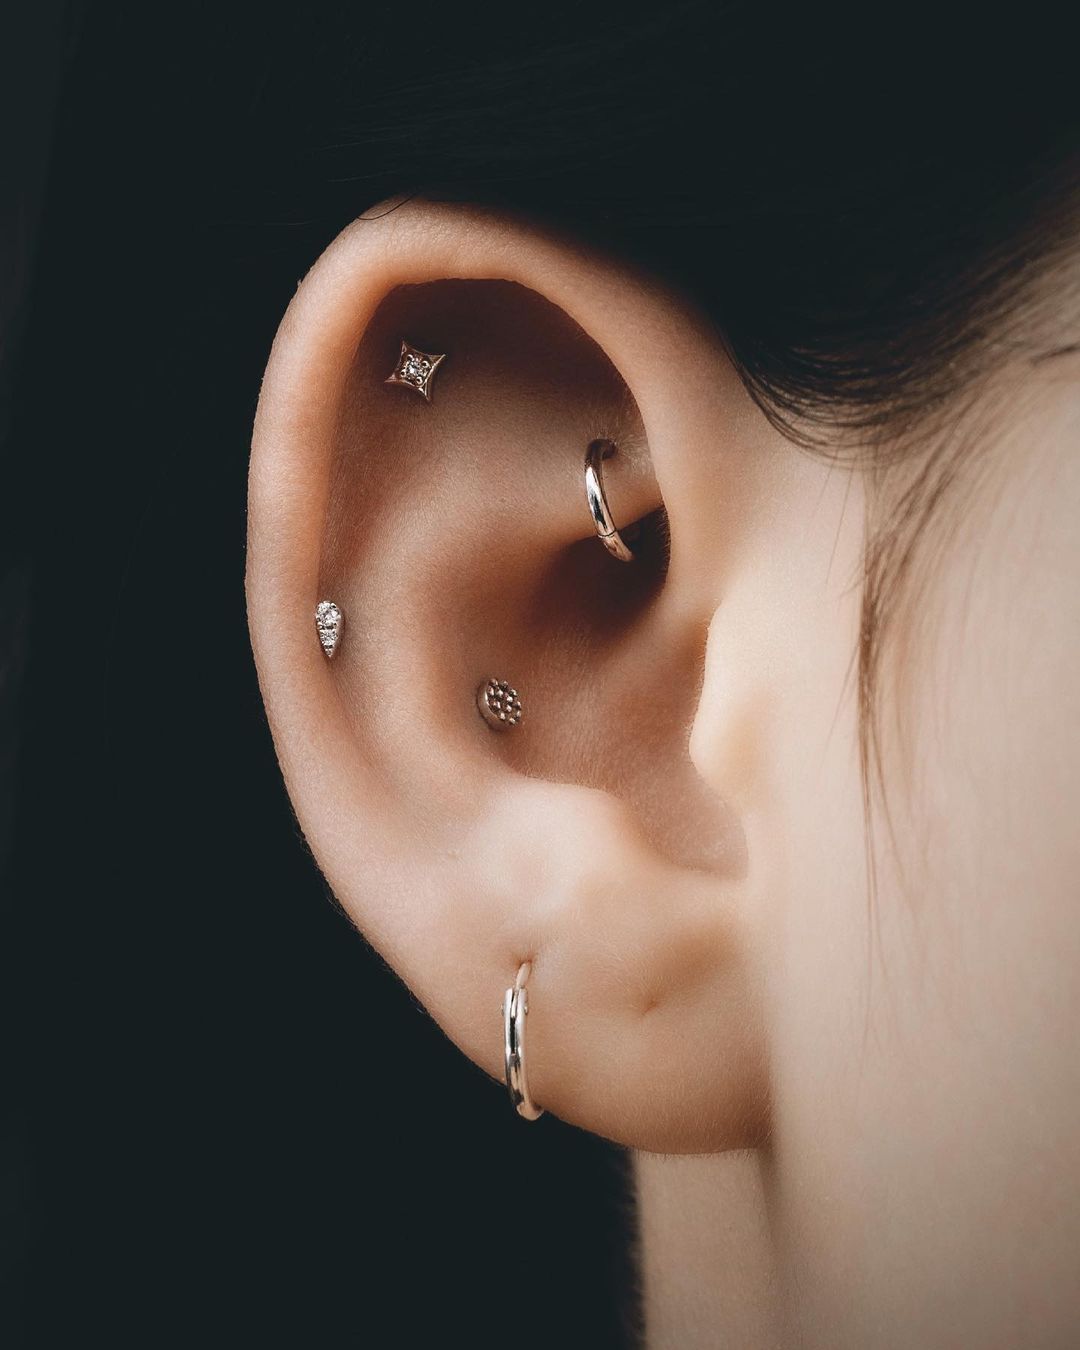 Constellation Ear Piercing Matched with Silver Hoops